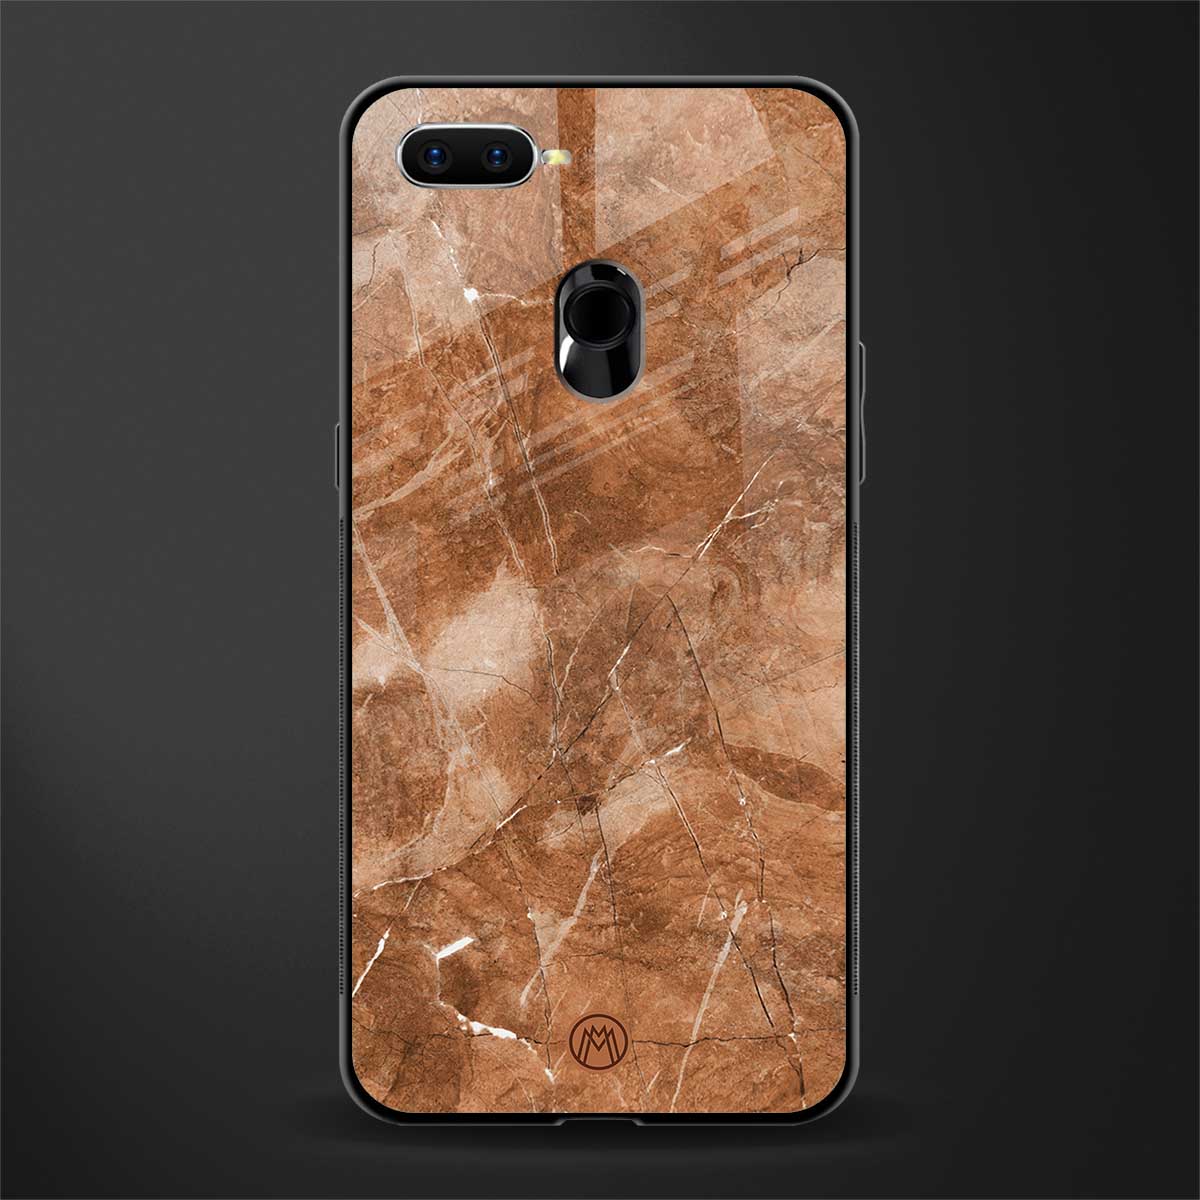 caramel brown marble glass case for oppo a7 image